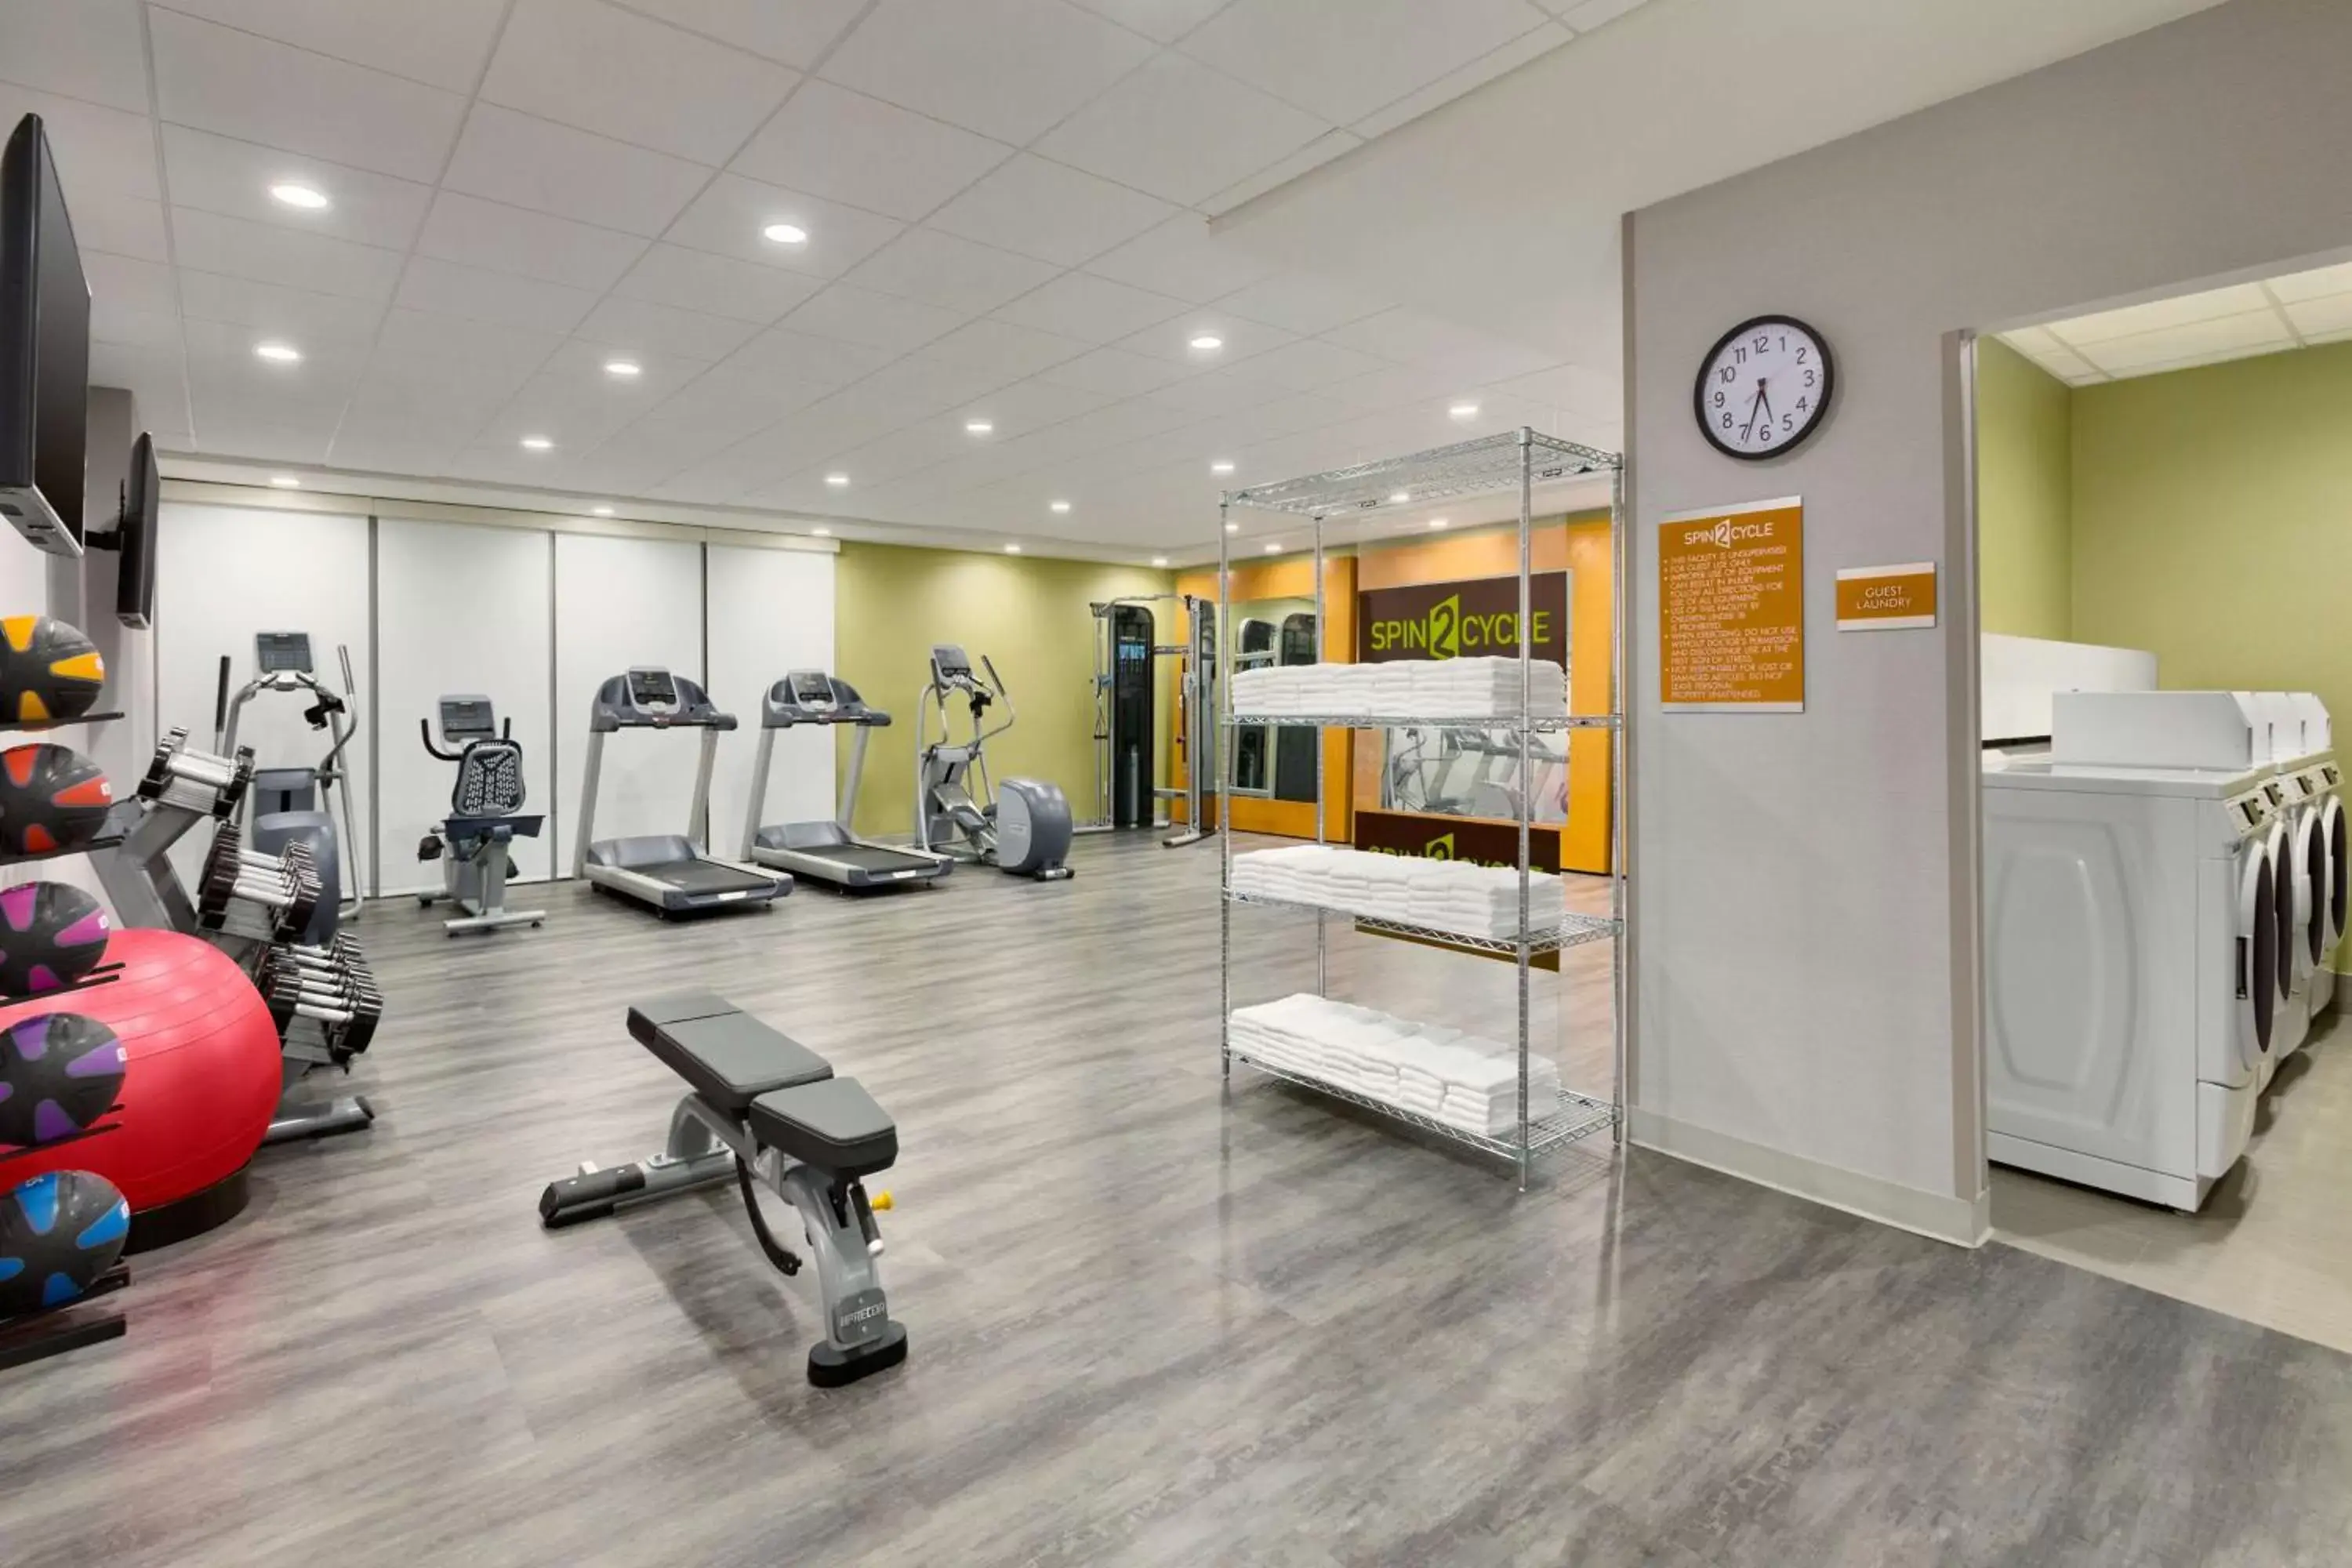 Fitness centre/facilities, Fitness Center/Facilities in Home2 Suites by Hilton Shenandoah The Woodlands